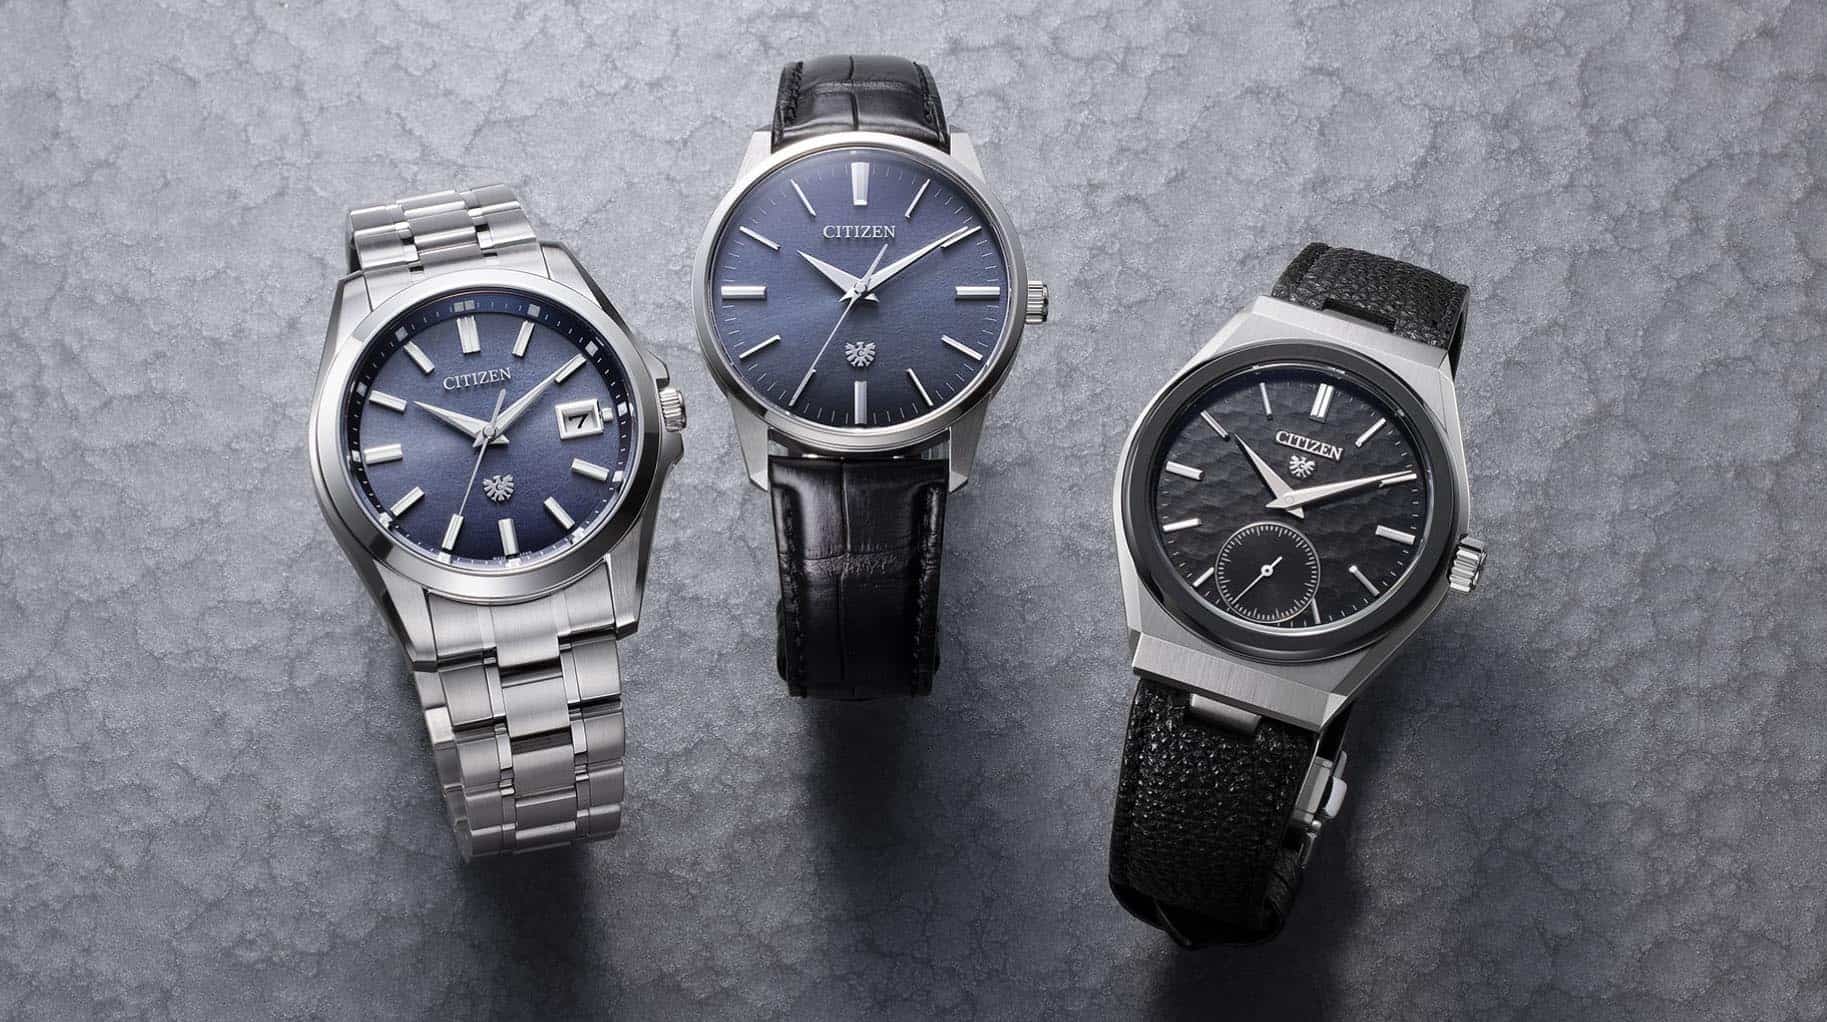 Citizen Dials In Their Dial Game With New The Citizen Watches - Worn & Wound